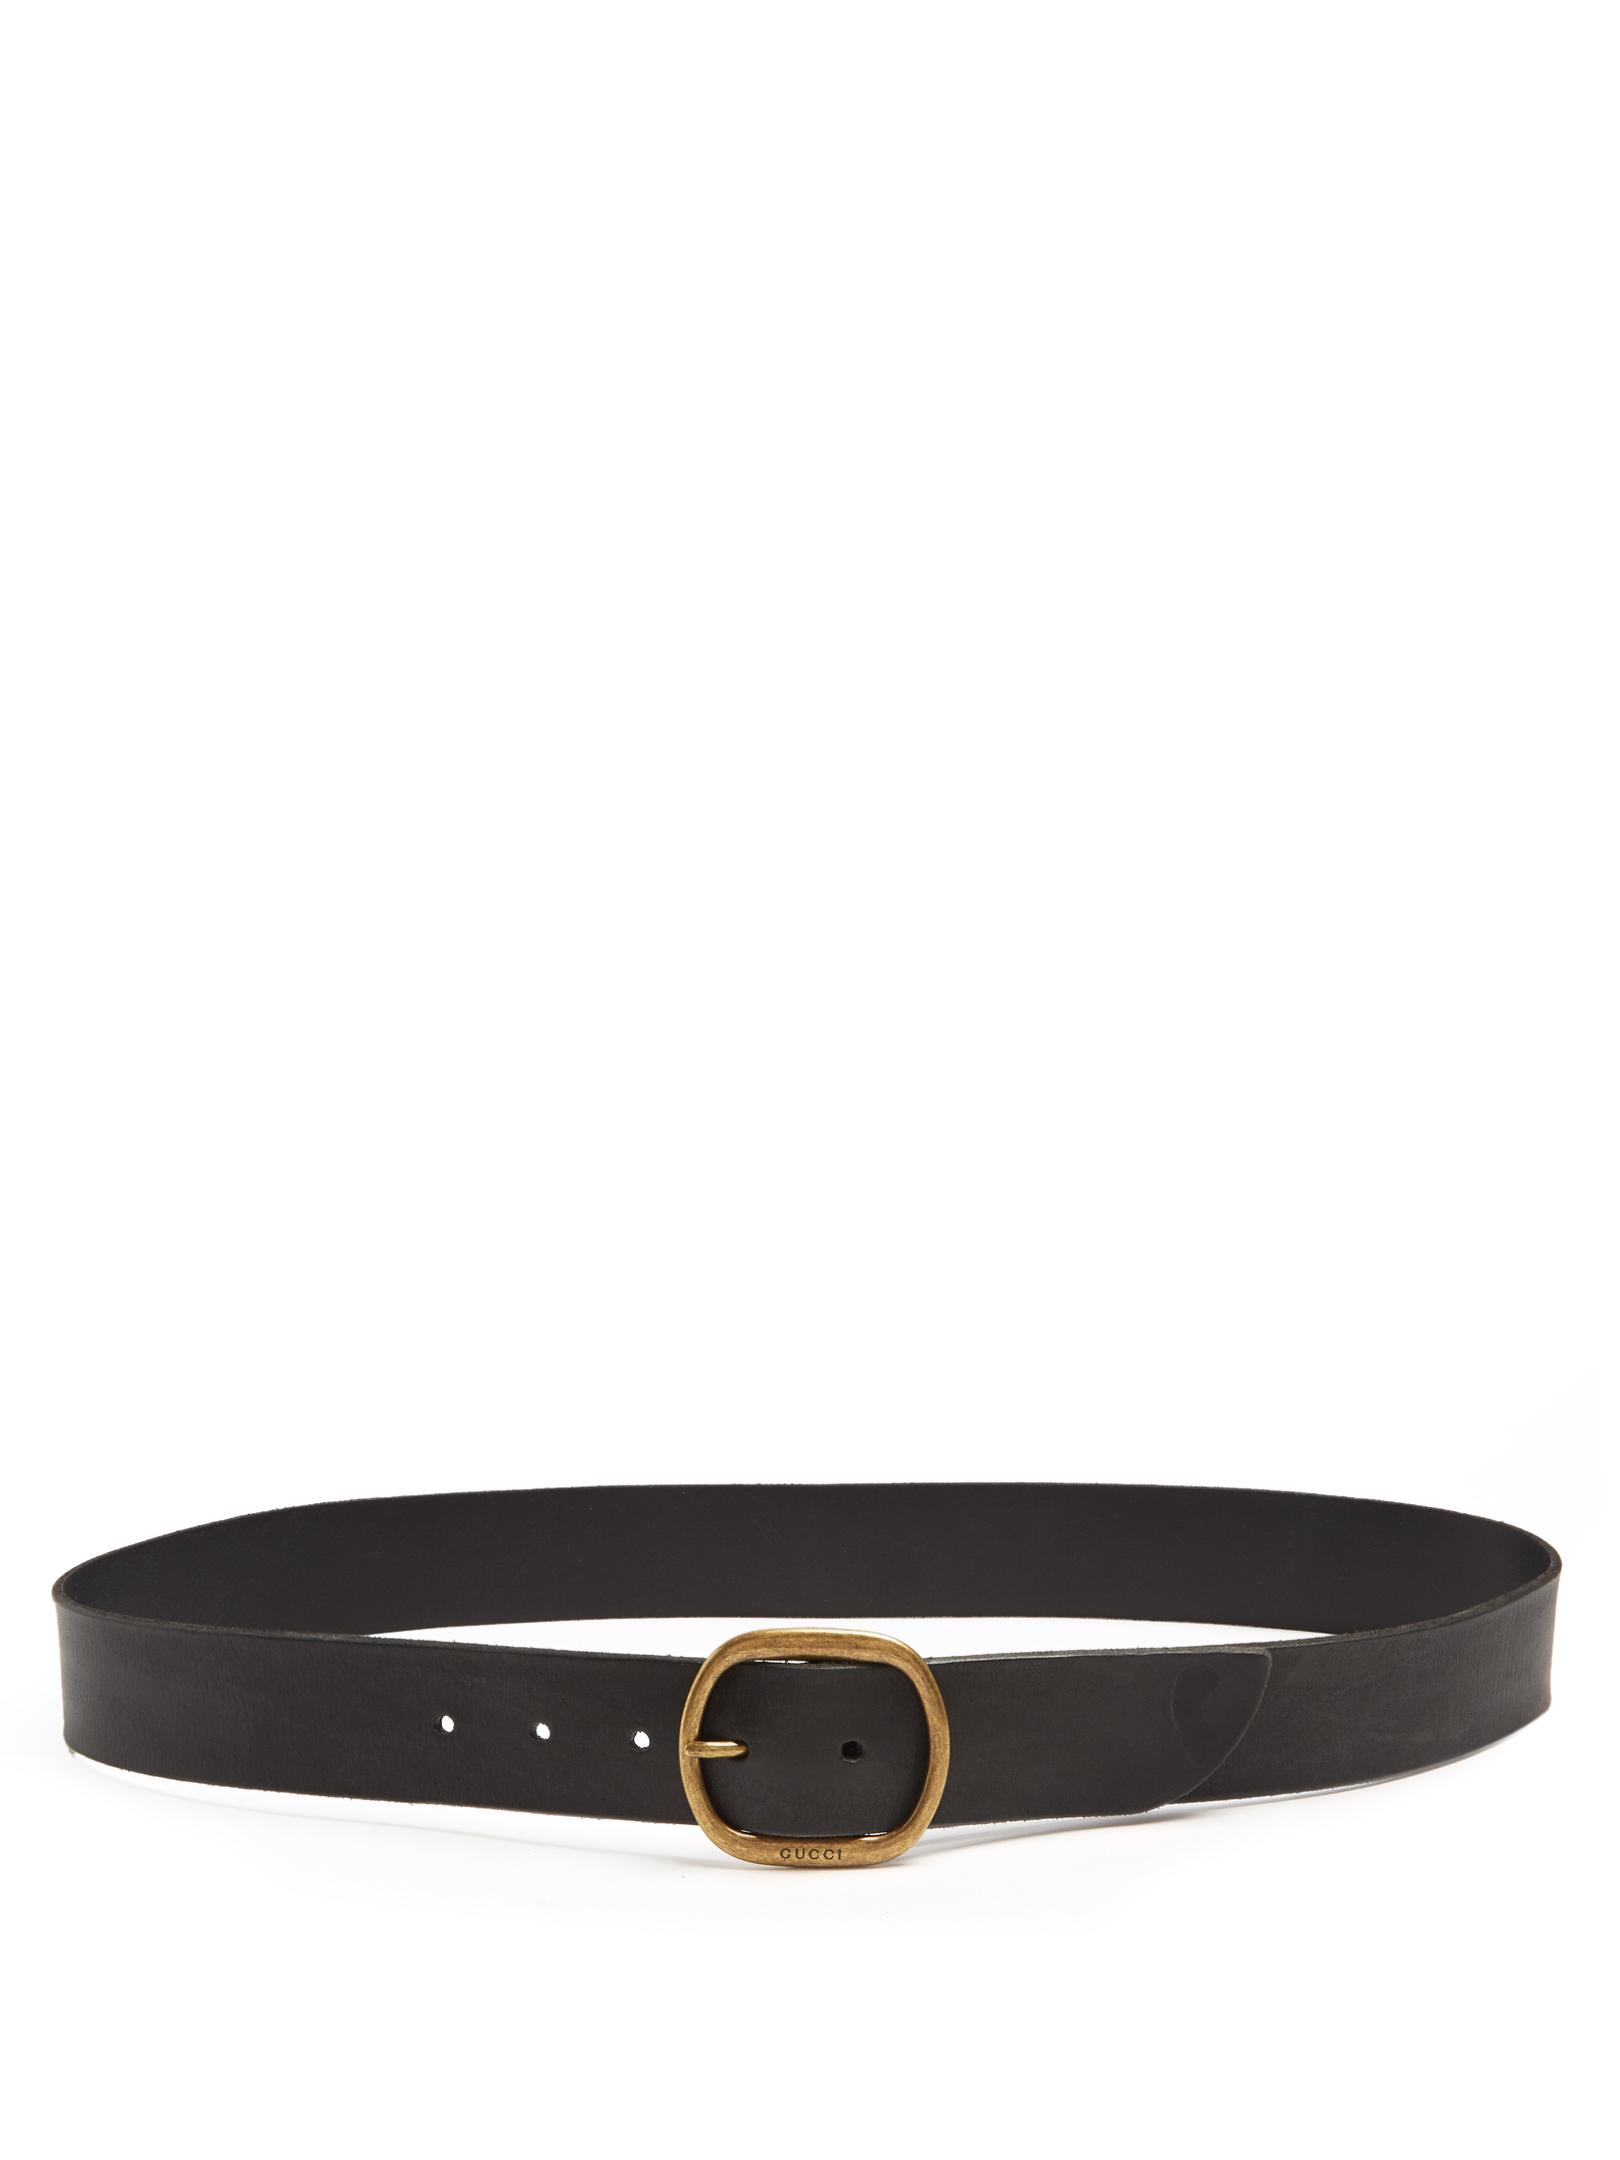 Lyst - Gucci Rounded Square-buckle Leather Belt in Black for Men